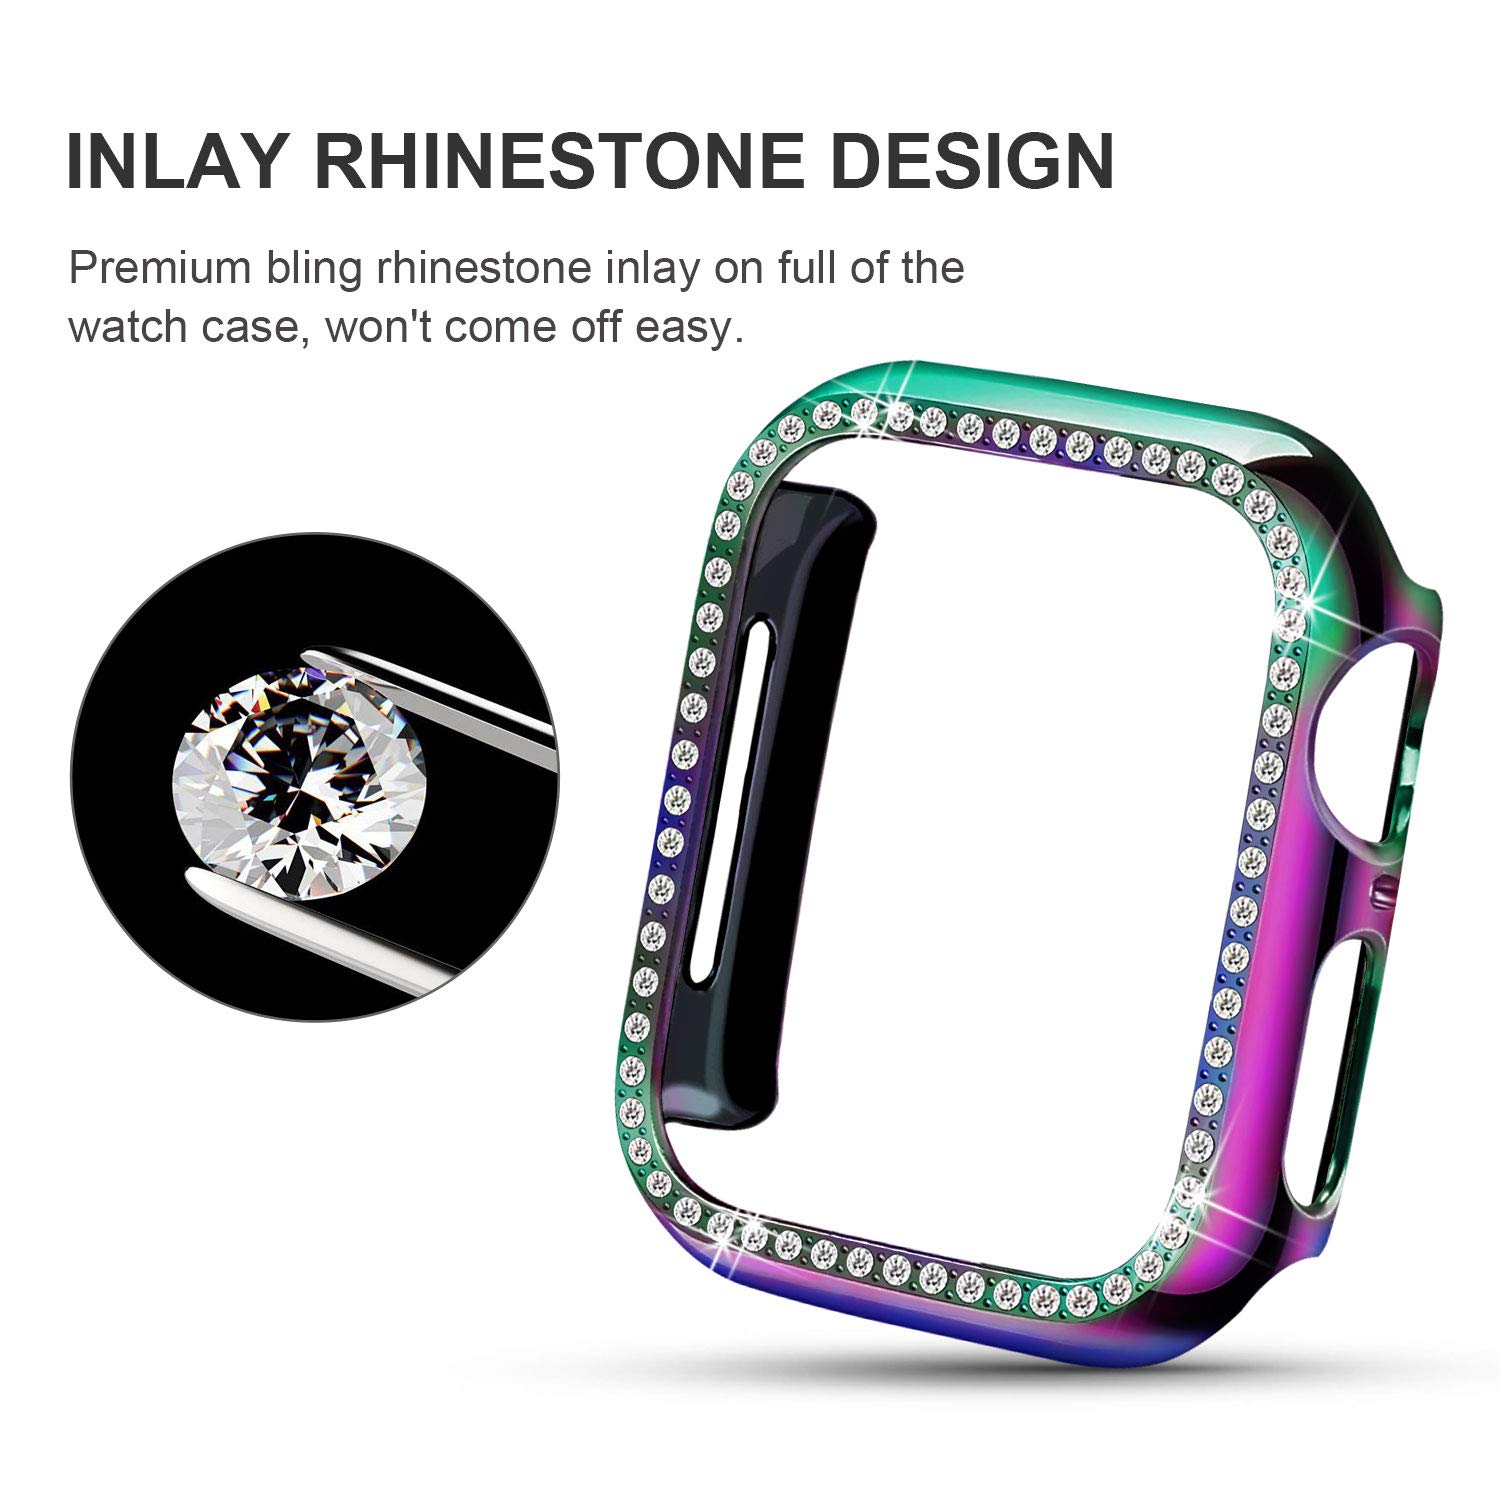 Yolovie Compatible for Apple Watch Case 38mm 40mm 42mm 44mm Bling Crystal Diamonds Rhinestone Bumper Cover for Women Girl, Hard PC Protective Frame for iWatch Series 6/5/4/3/2/1/SE/SE2-44mm Colorful